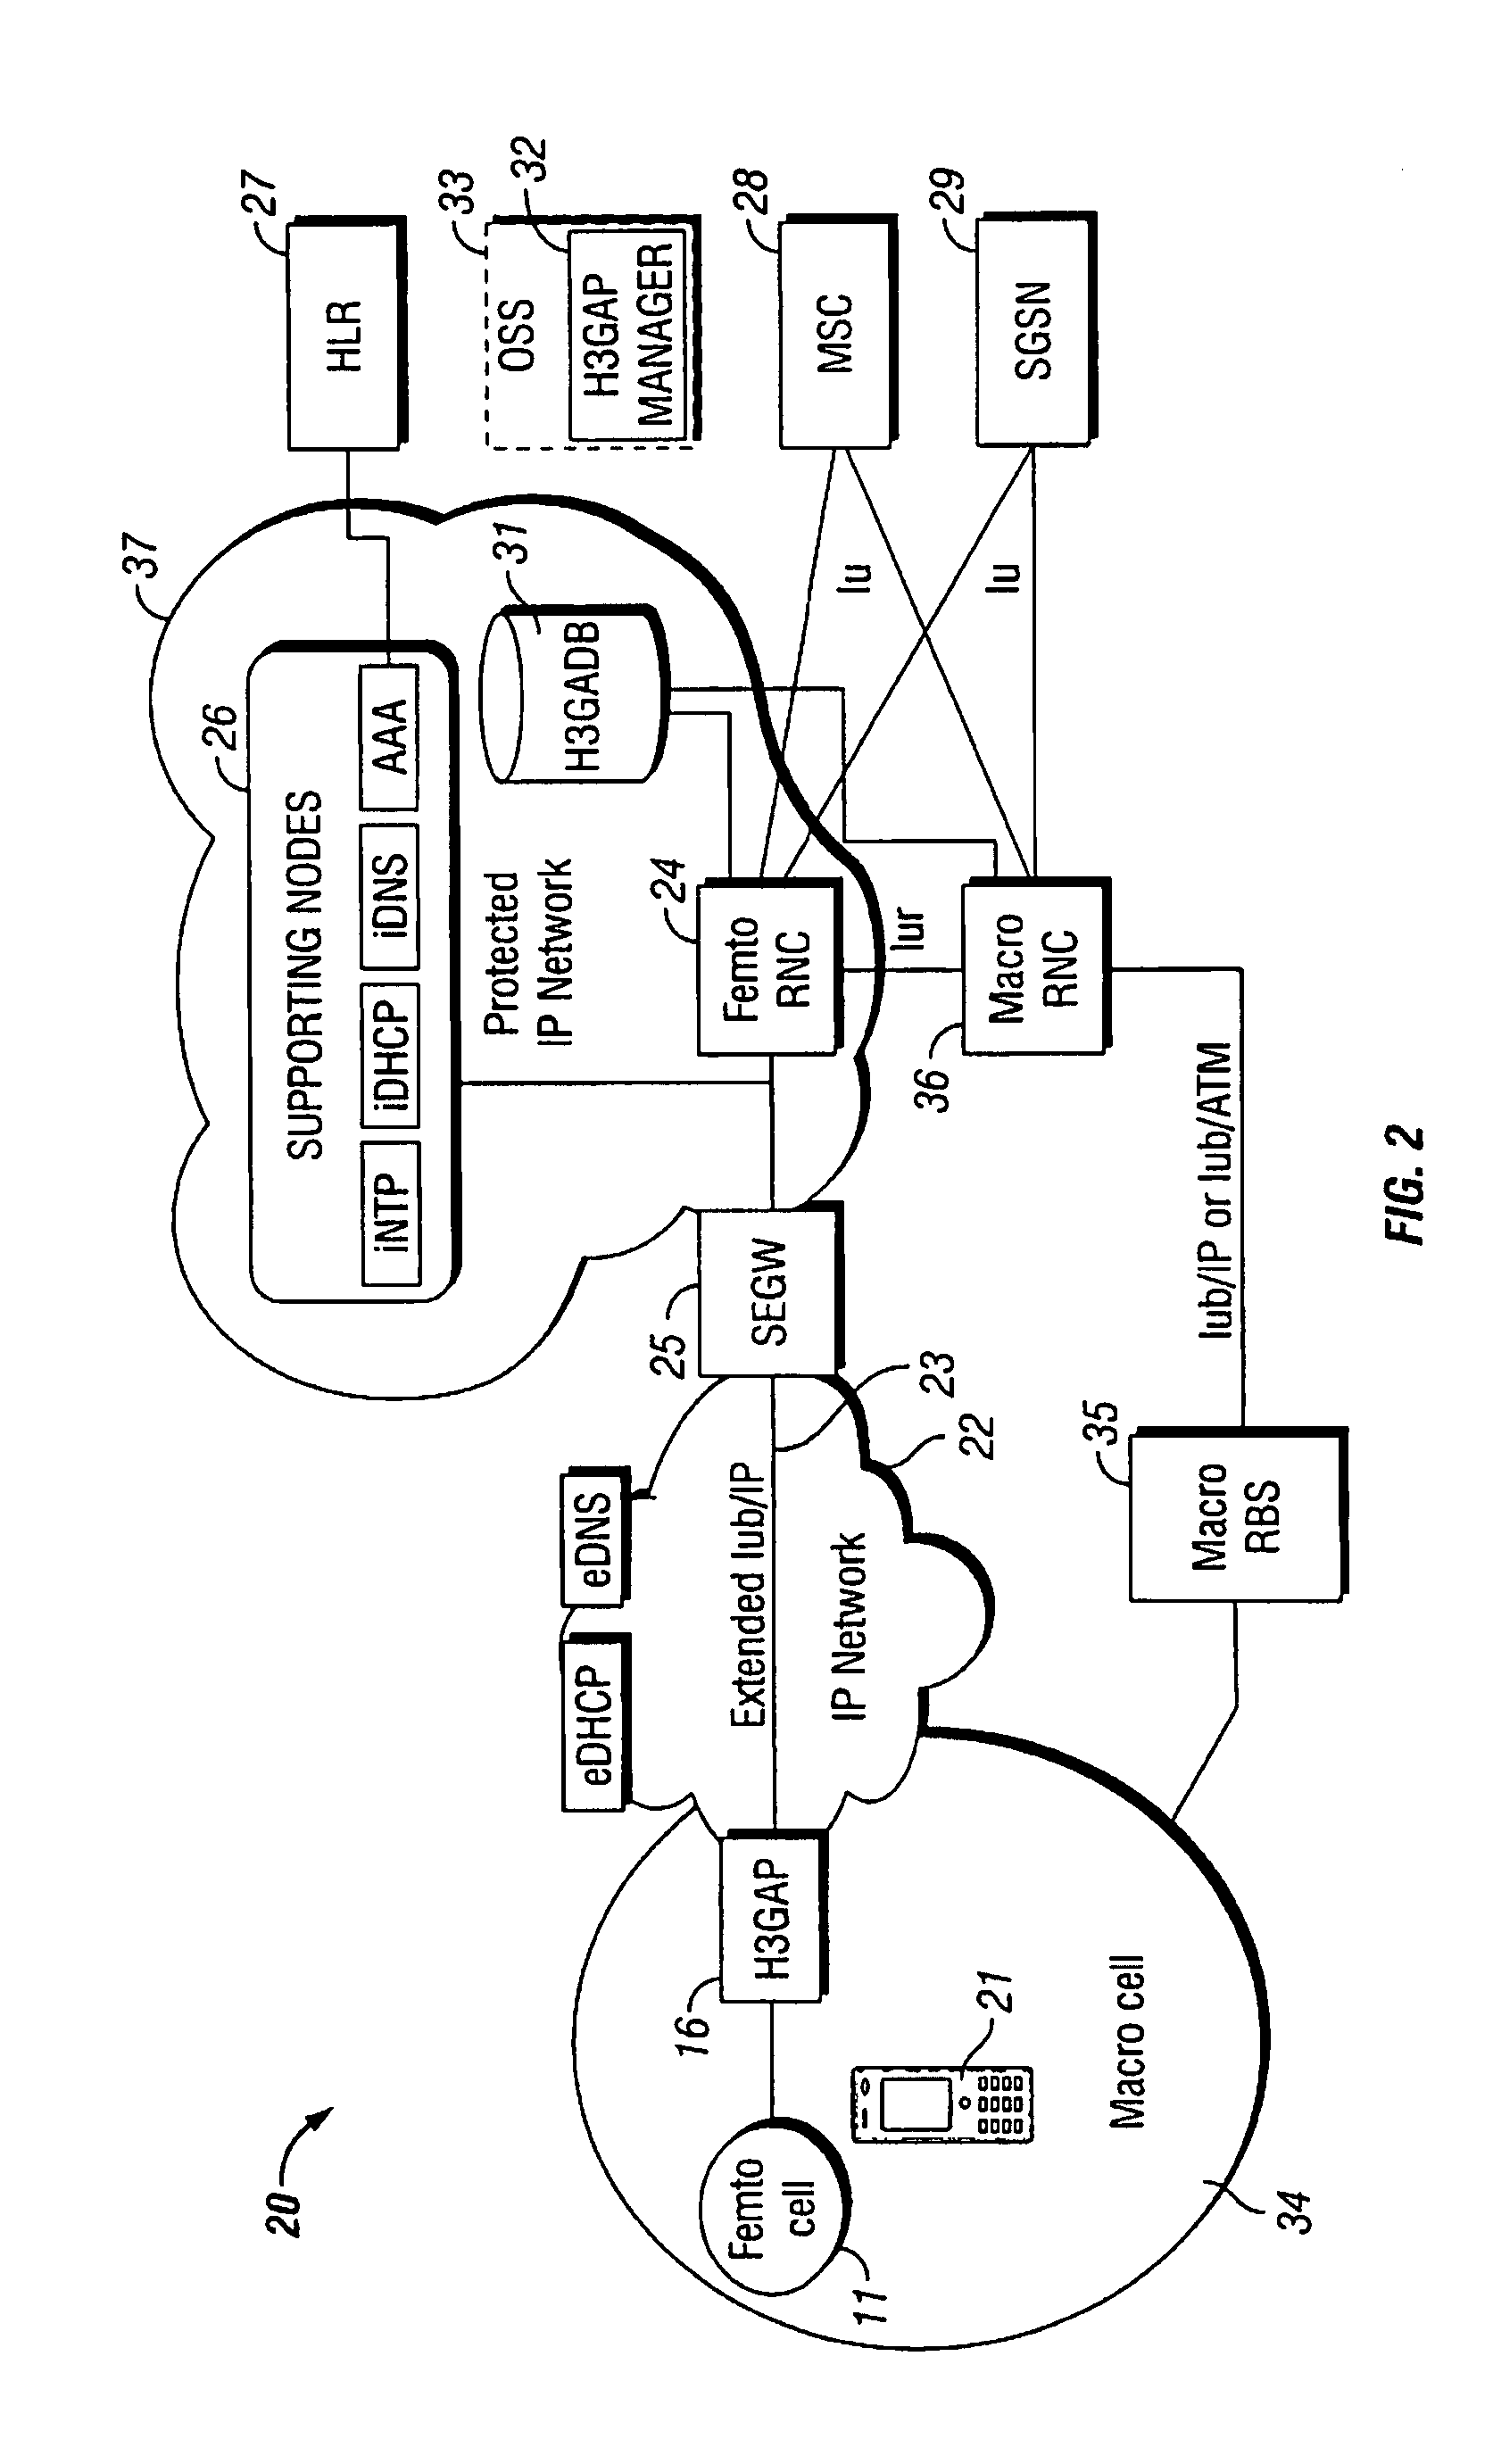 Access control system, method, and arrangement in a wireless communication network